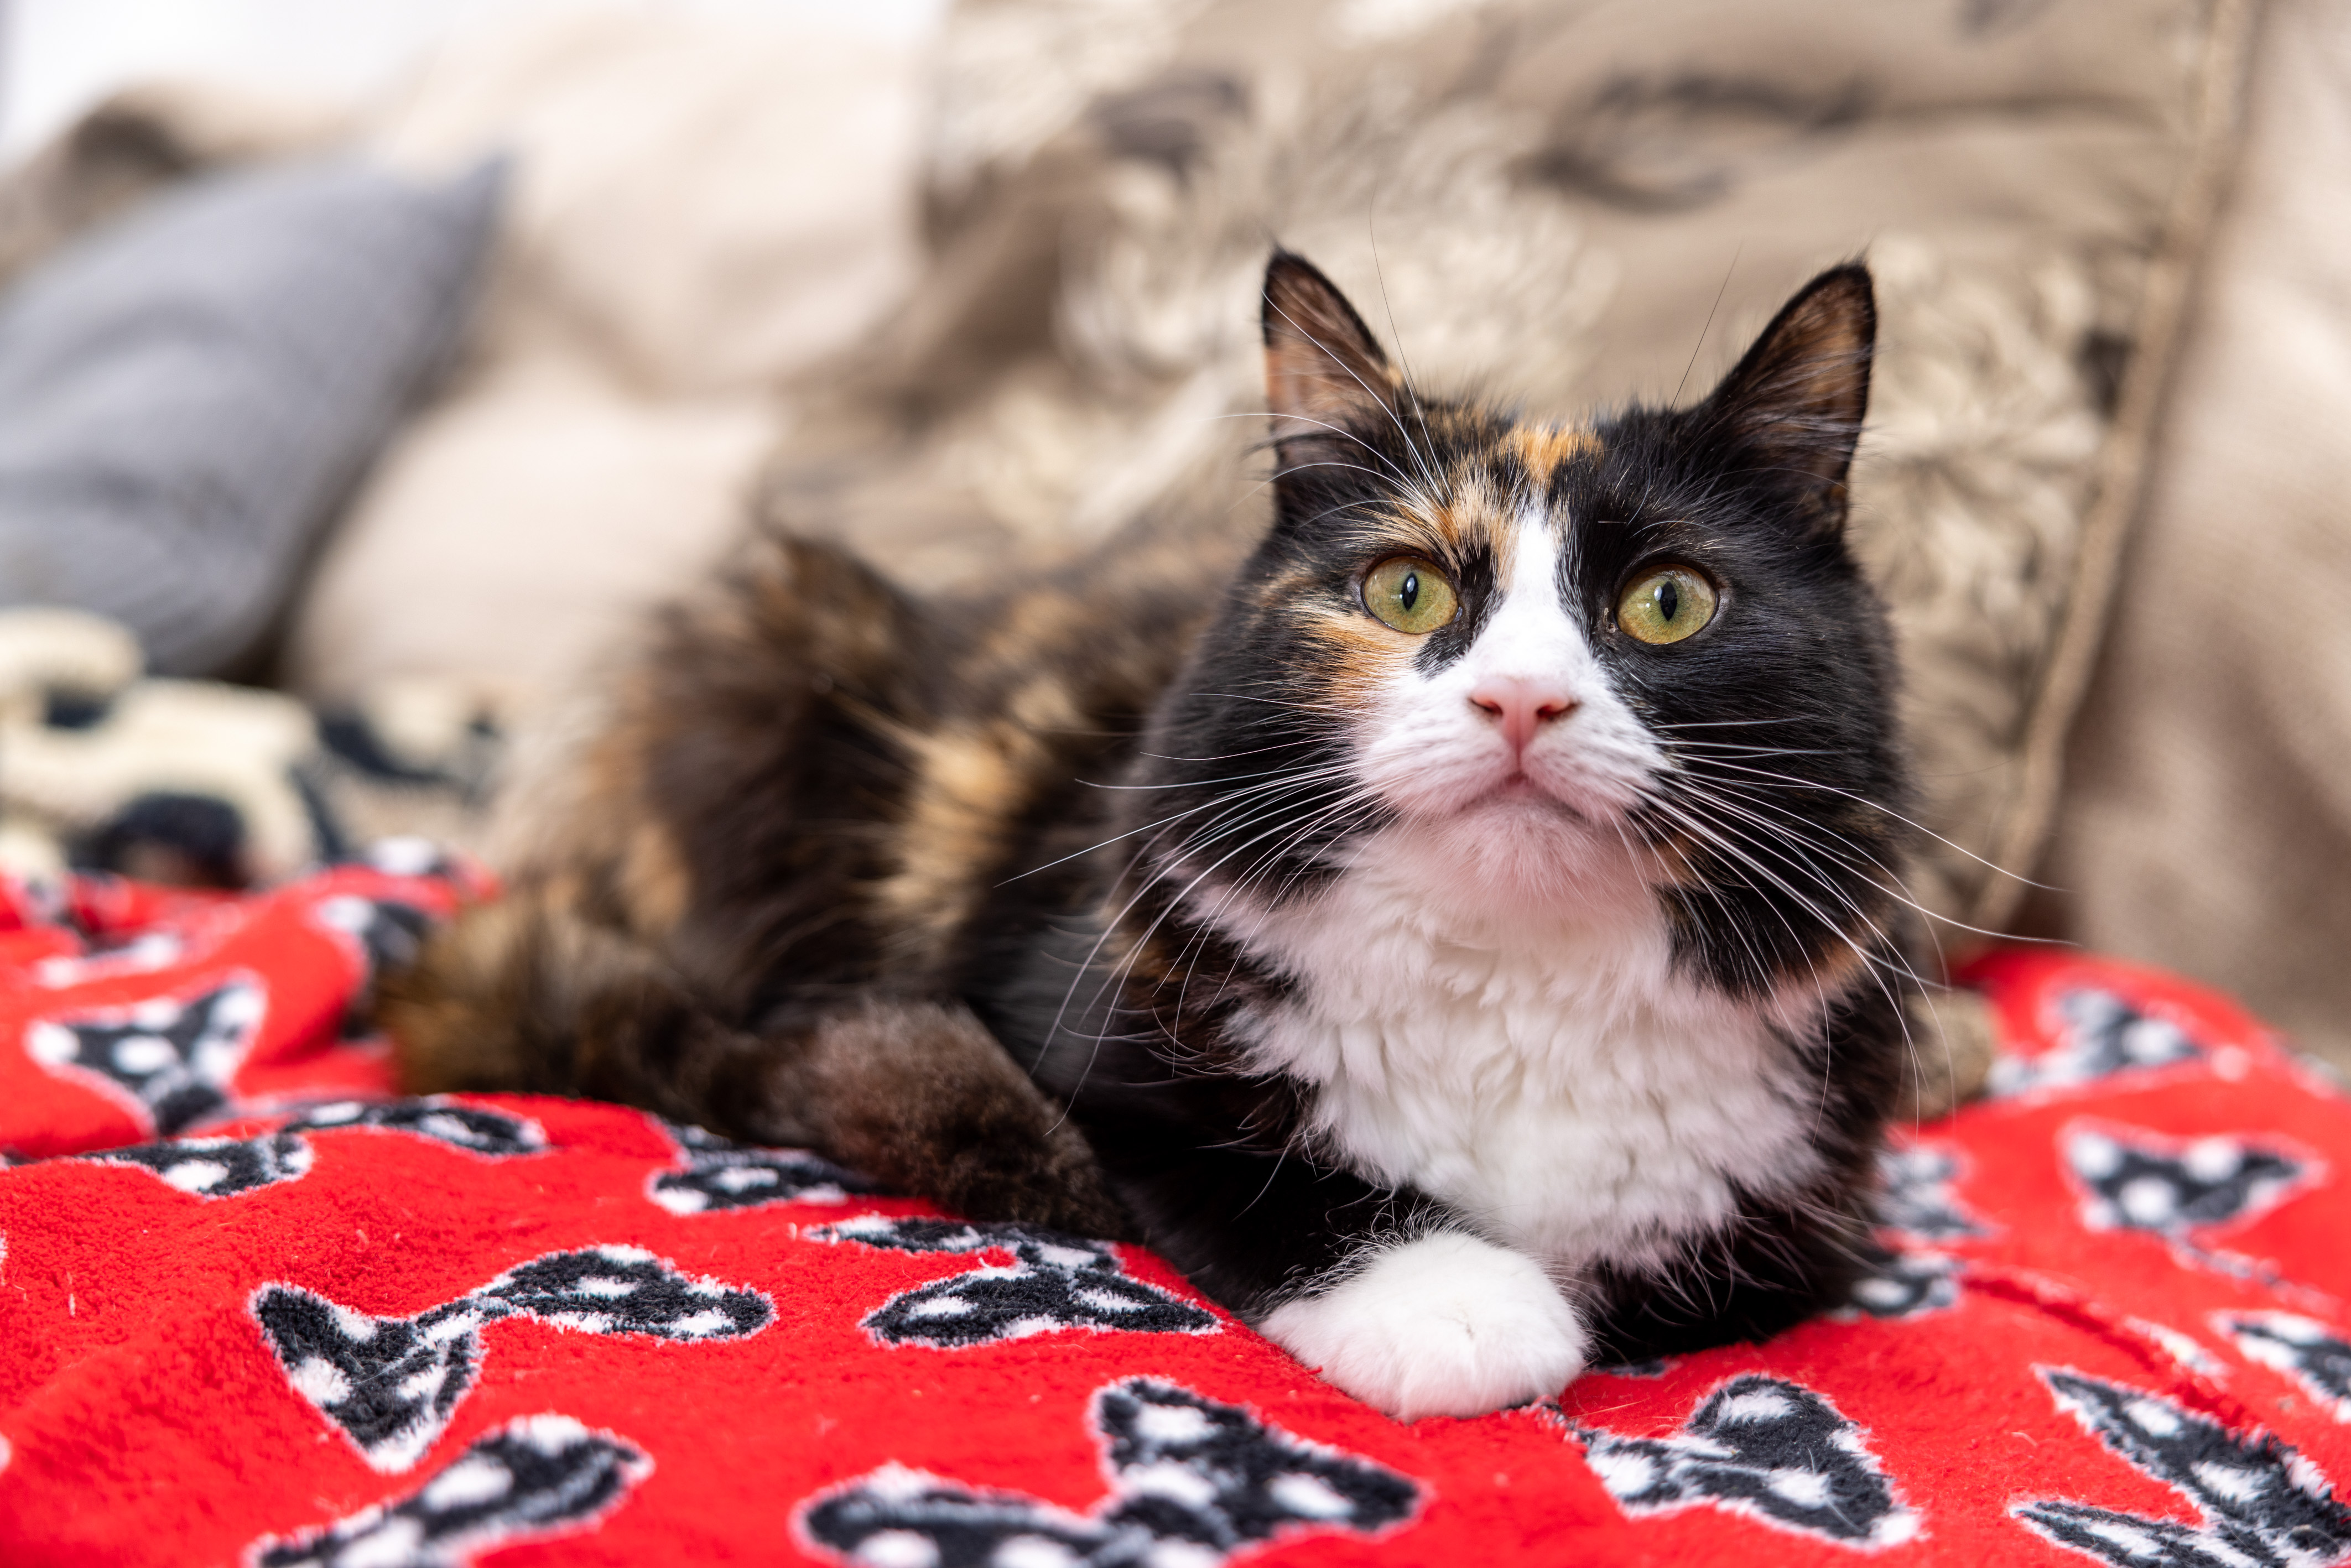 Willow, owned by Amanda Jameson, is announced as a finalist in the 'Moggy Marvels' category of this year's Cats Protection National Cat Awards